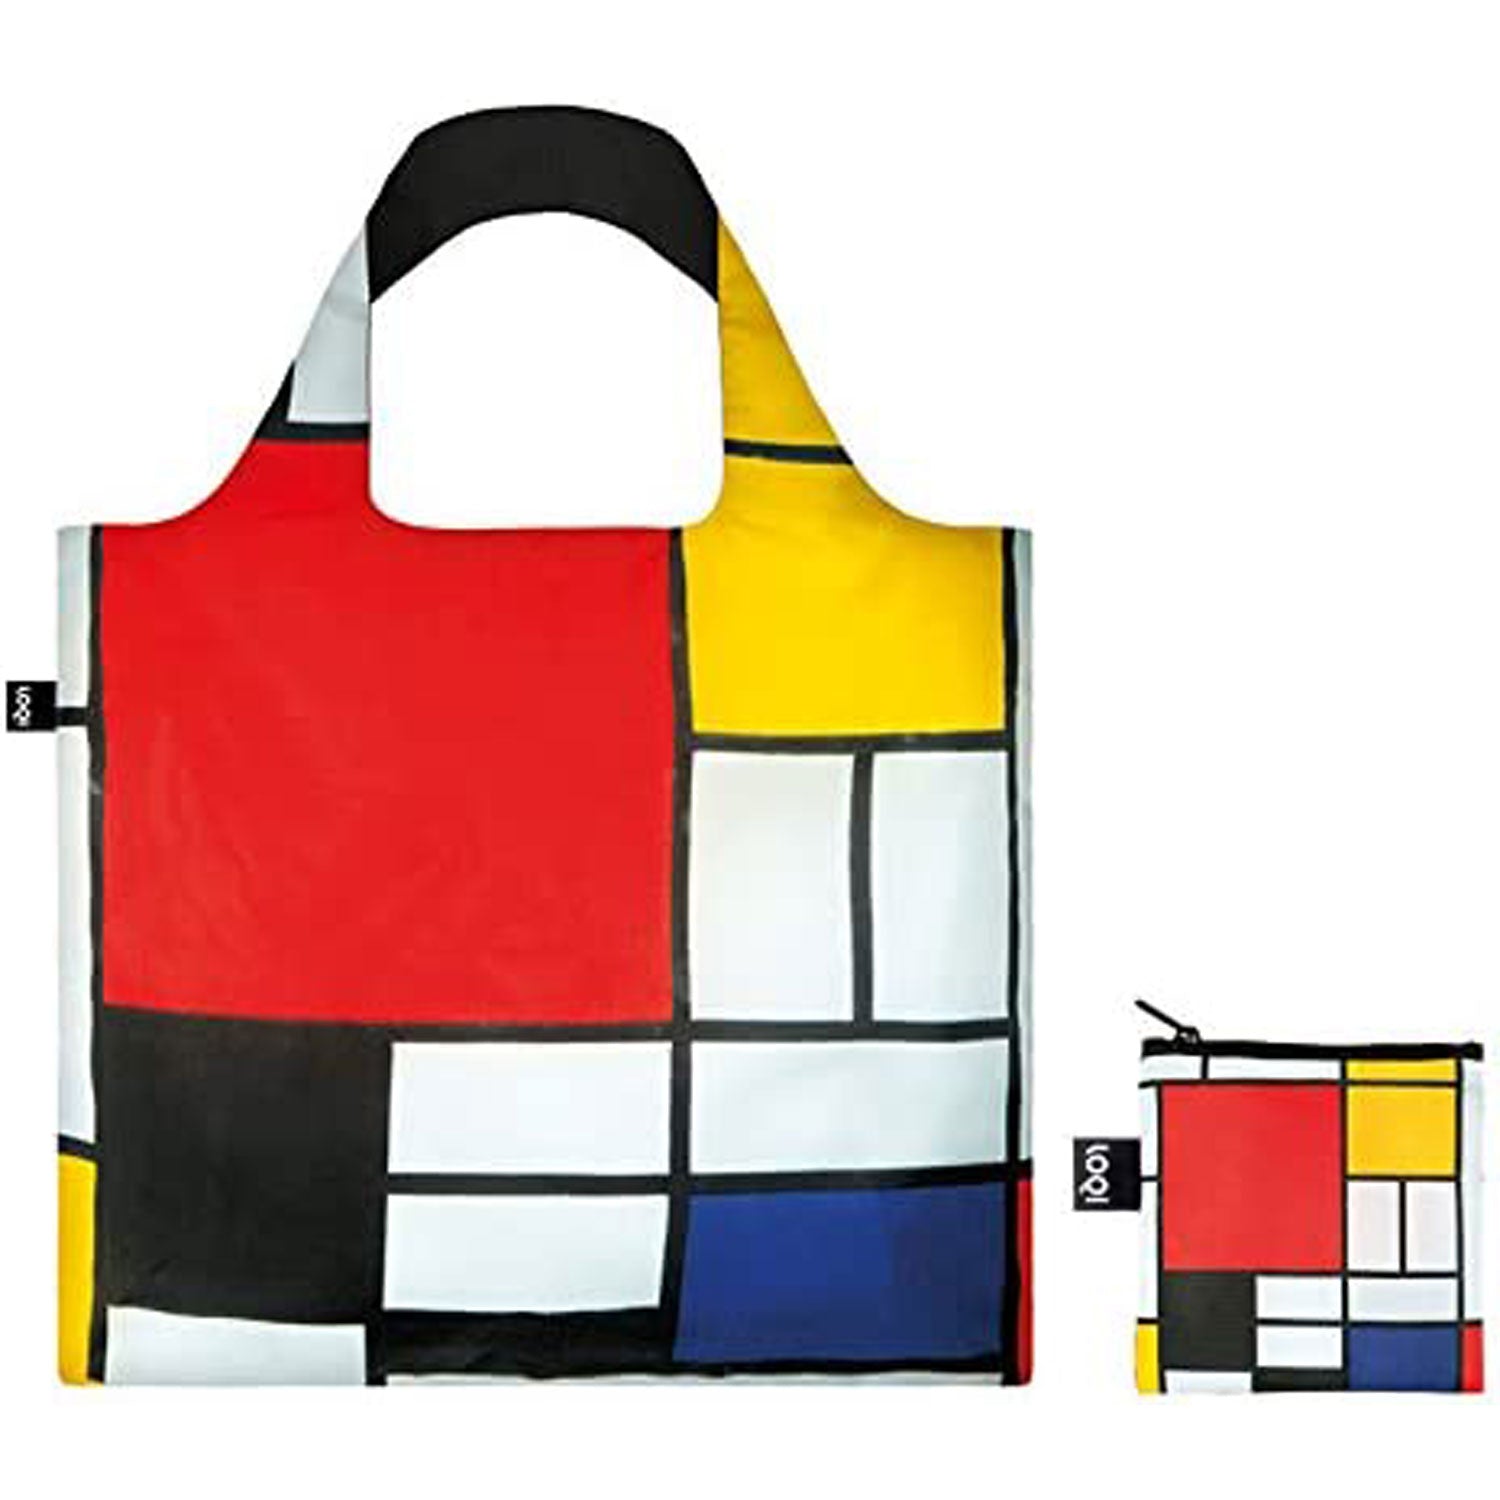 LOQI bag "Composition with Red Yellow Blue Black"